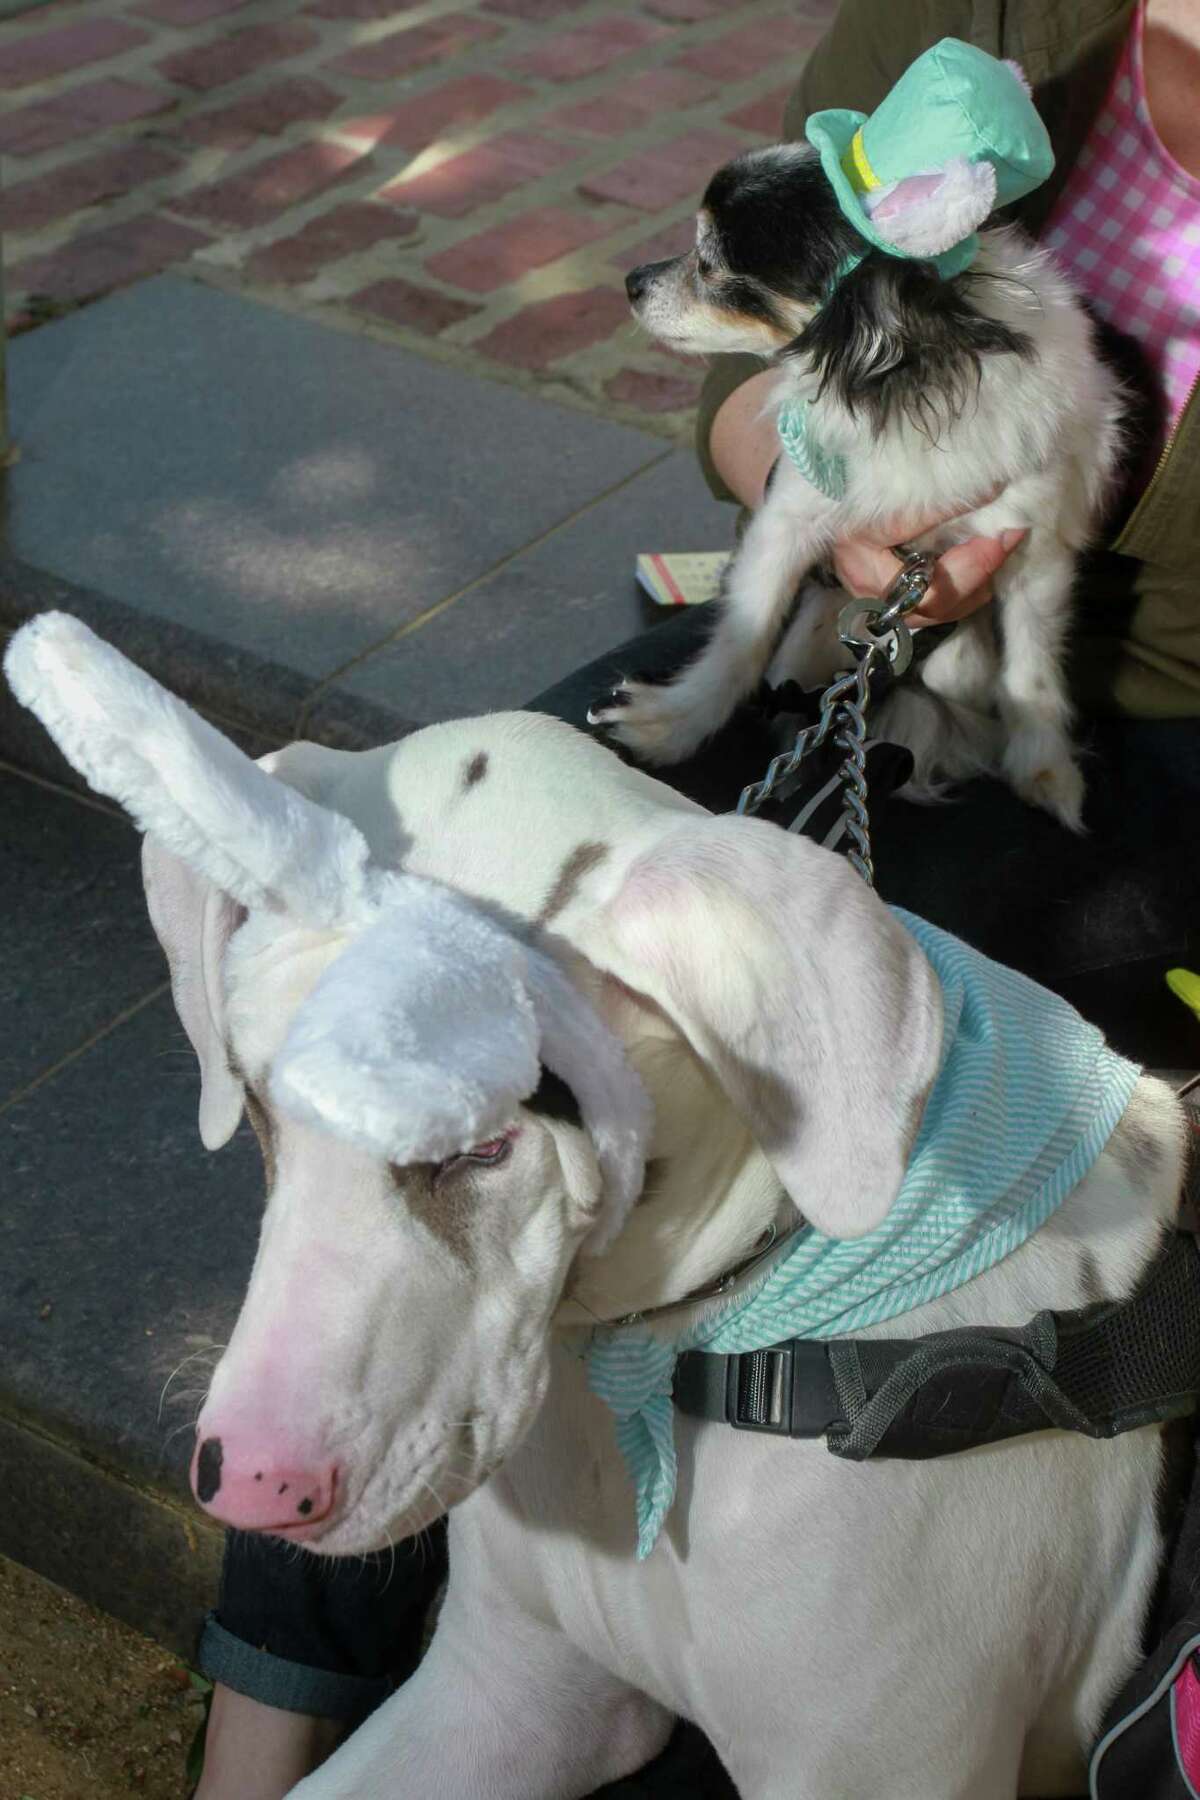 Kristina Morgan's Great Dane, Domino, and Chihuahua, Charlie, at Puppies for Breakfast, which celebrated 8 years as the largest dog festival in Houston.